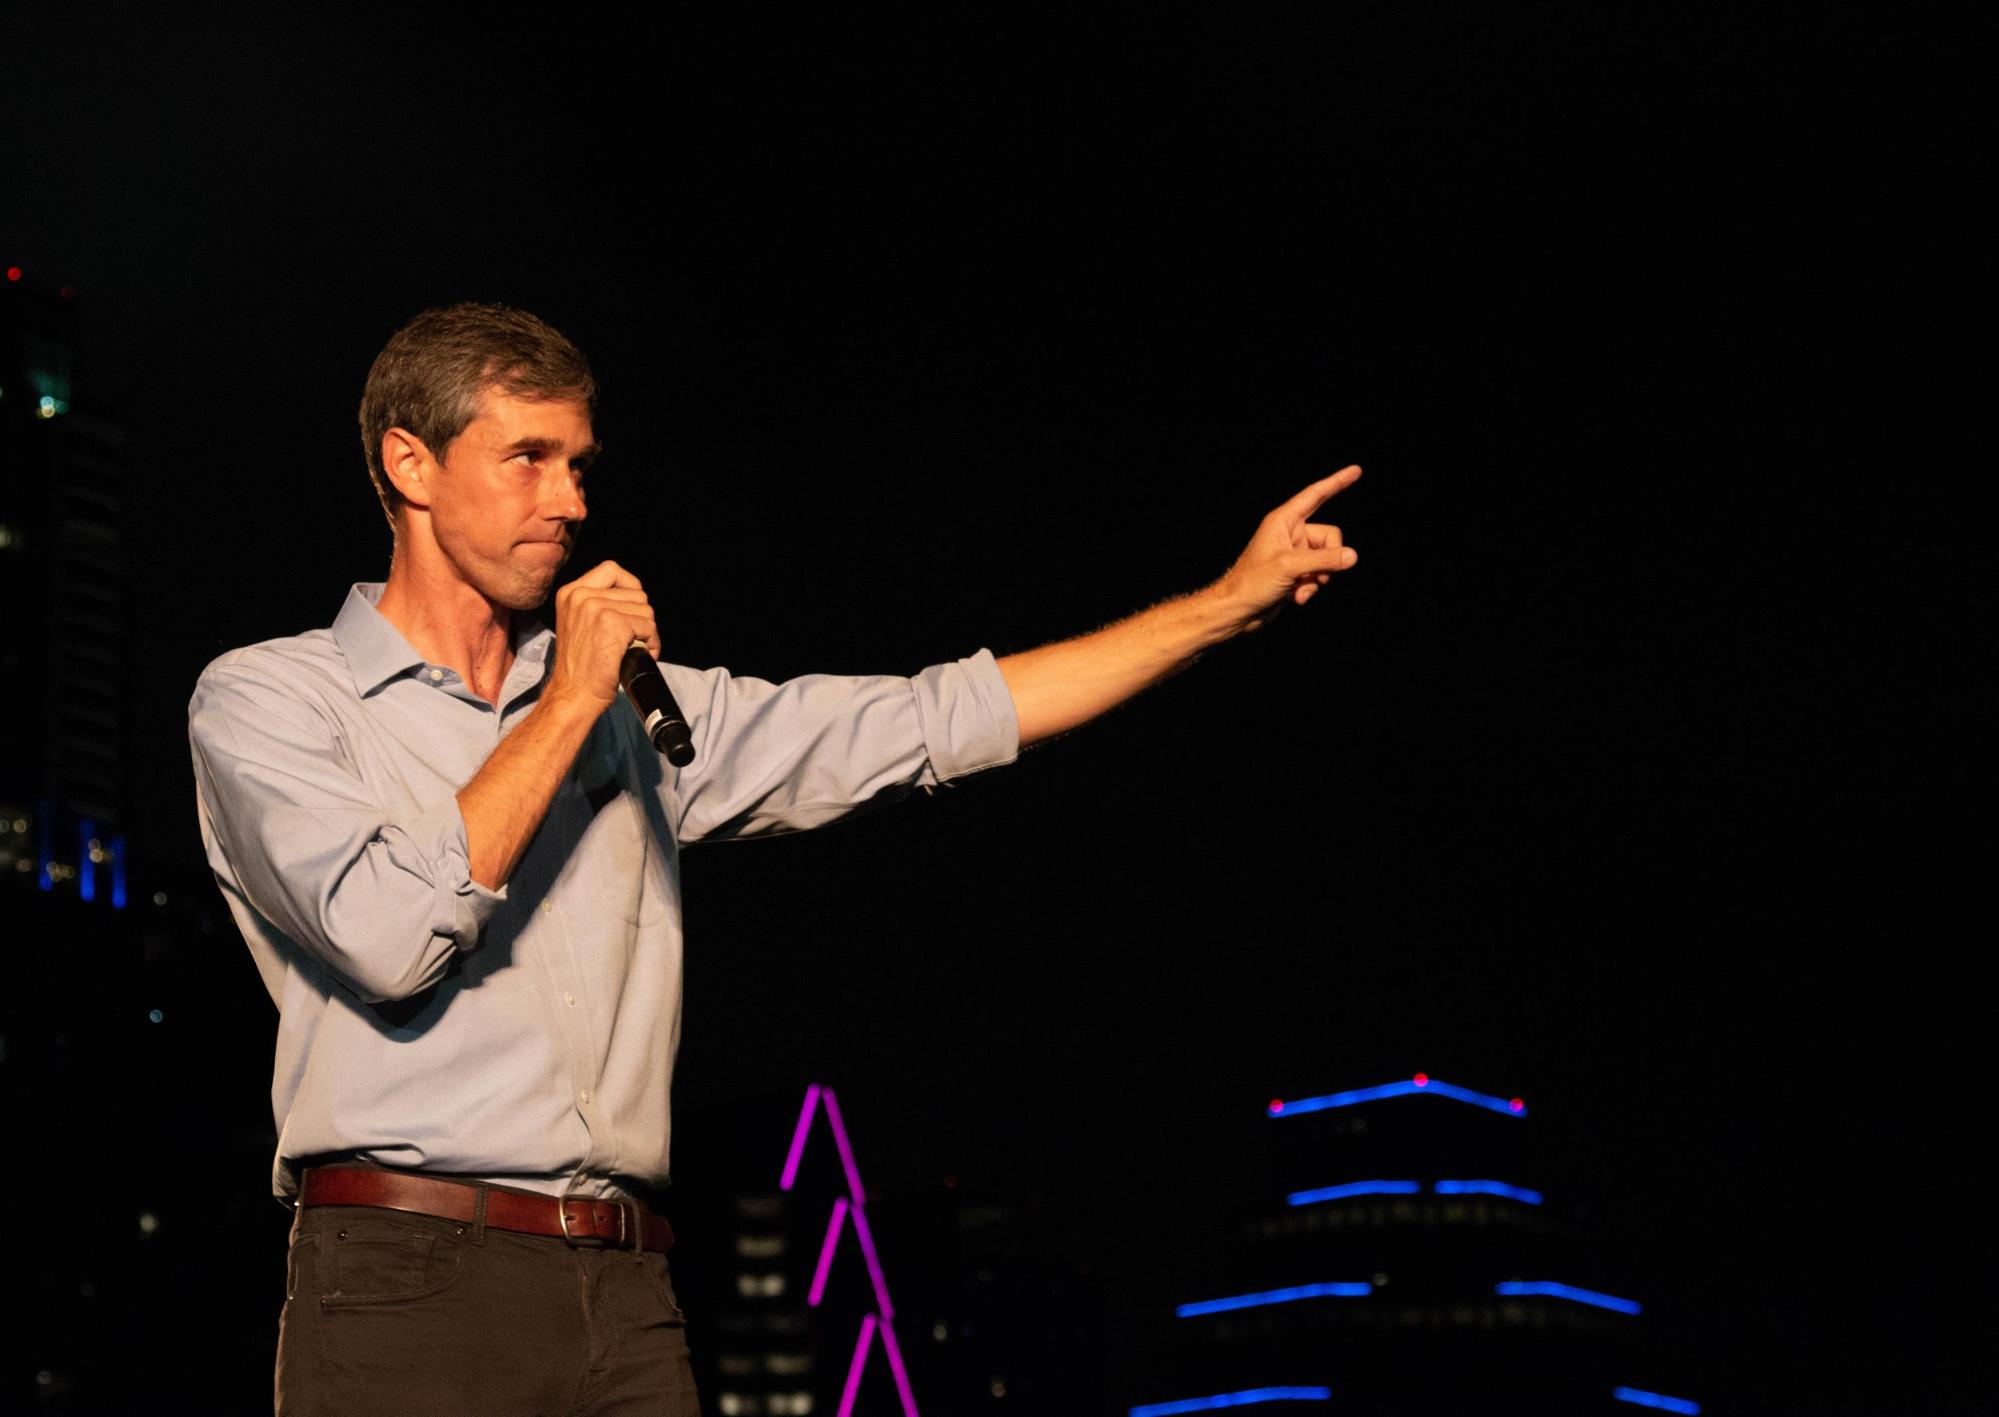   Beto O’Rourke encourages everyone in the crowd to register to vote. Photo by Jordan Steyer.  